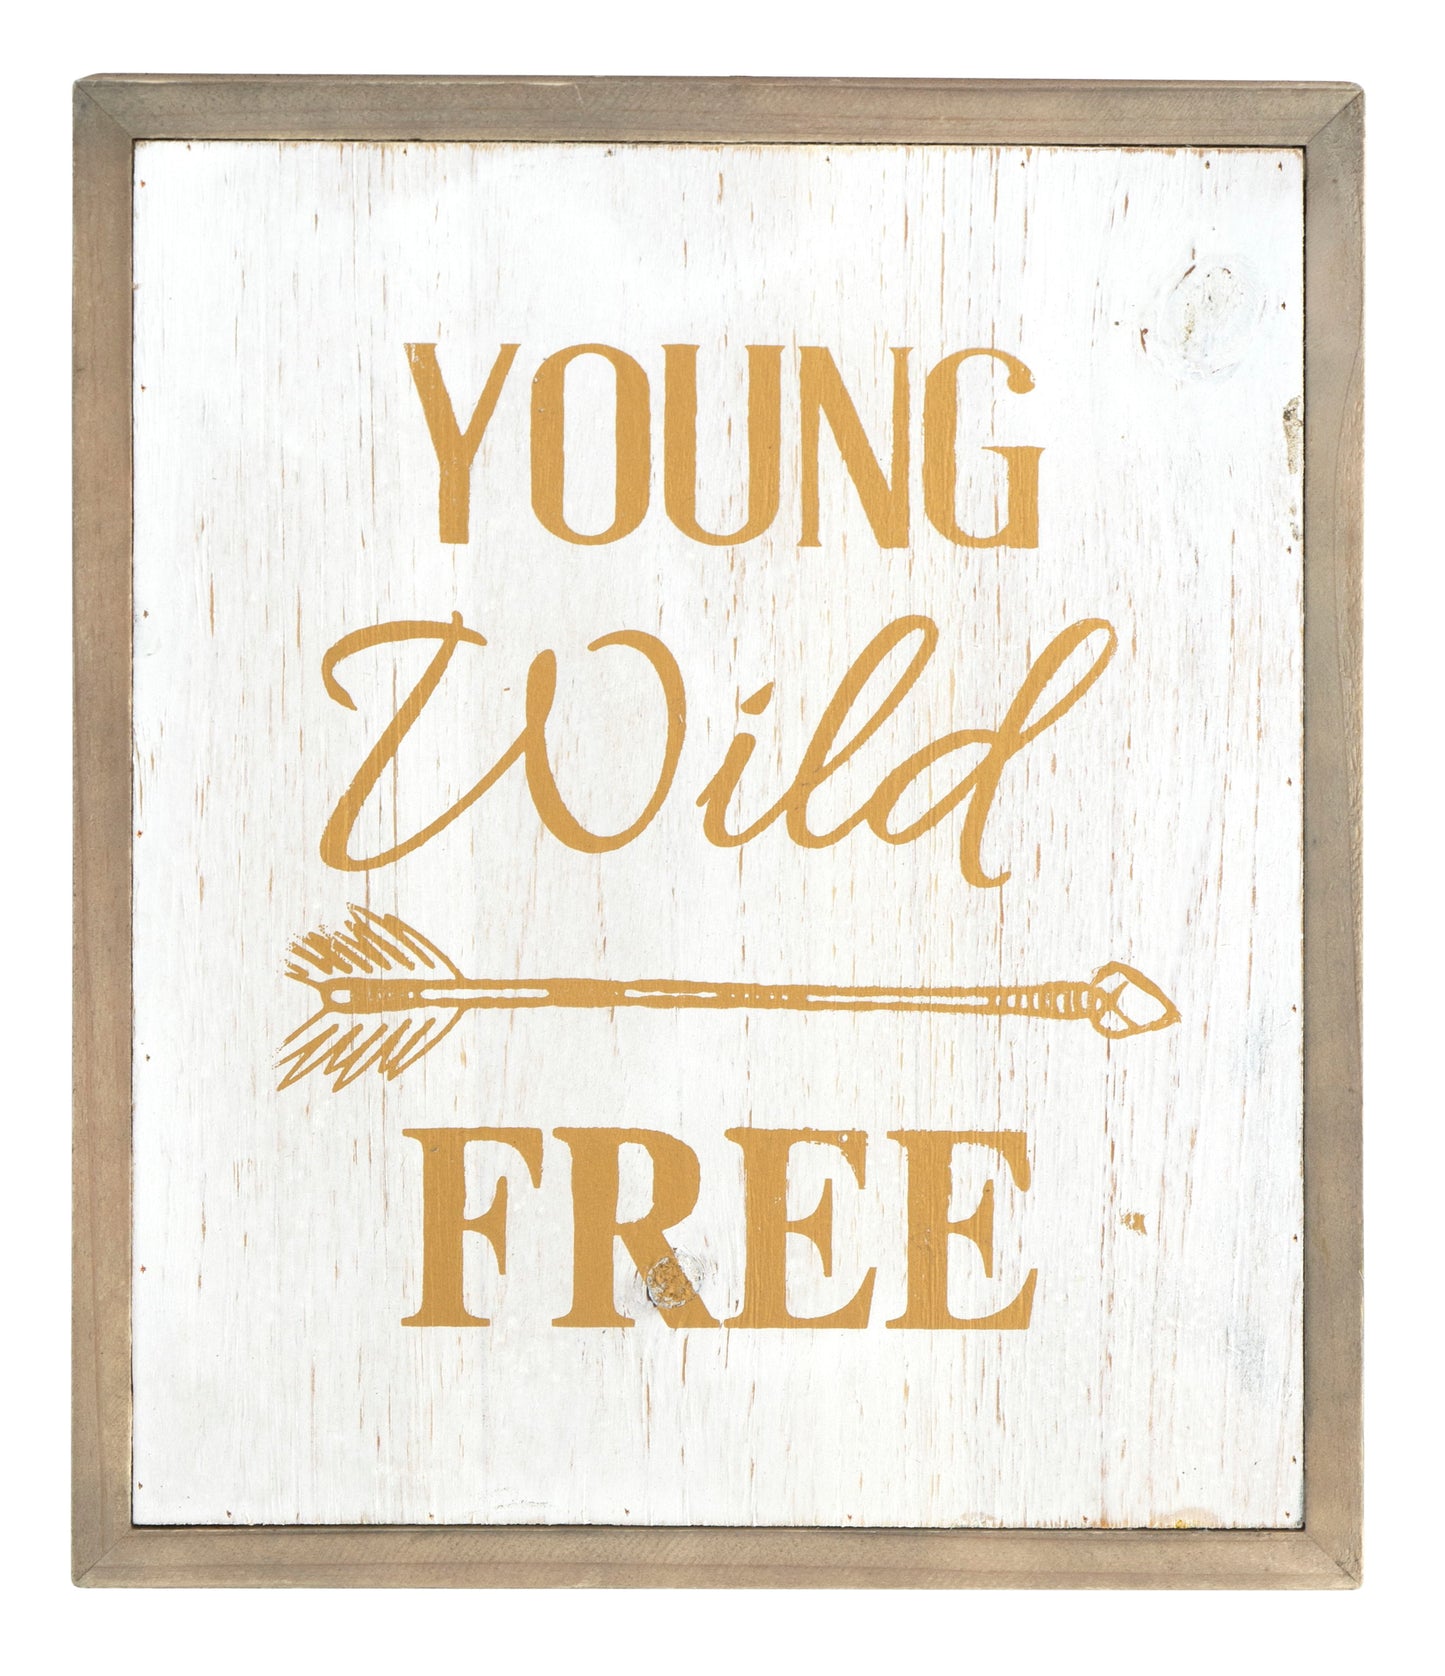 Young Wild Free